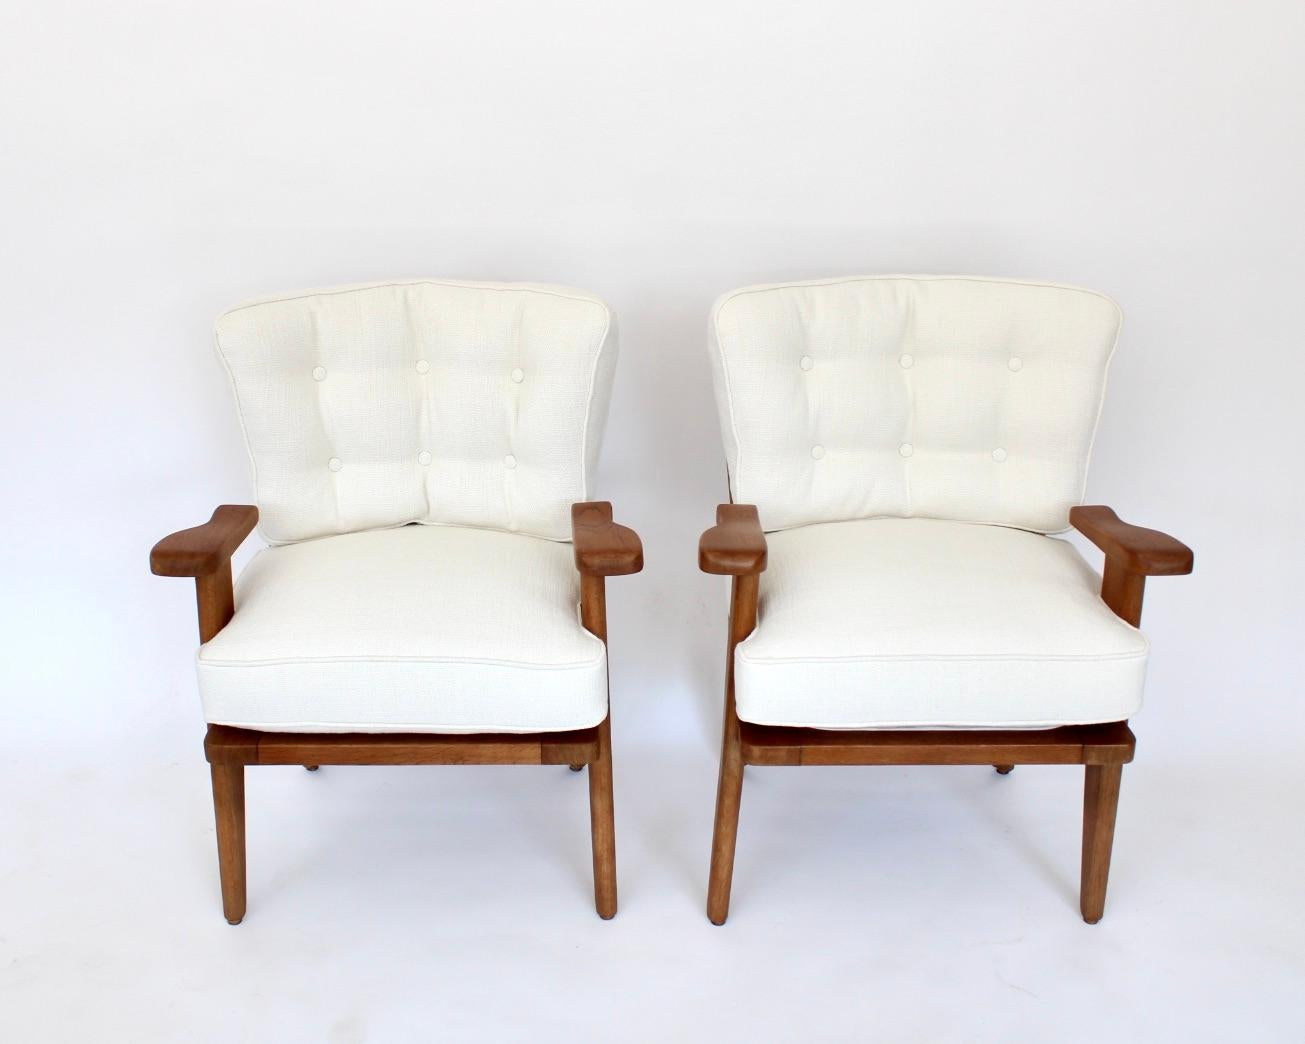 These sculptural French lounge or chairs are designed by Guillerme et Chambron for Votre Maison. 
They are known for their high quality solid oak furniture. 
This comfortable armchair has an interesting open construction, similar to the grand and